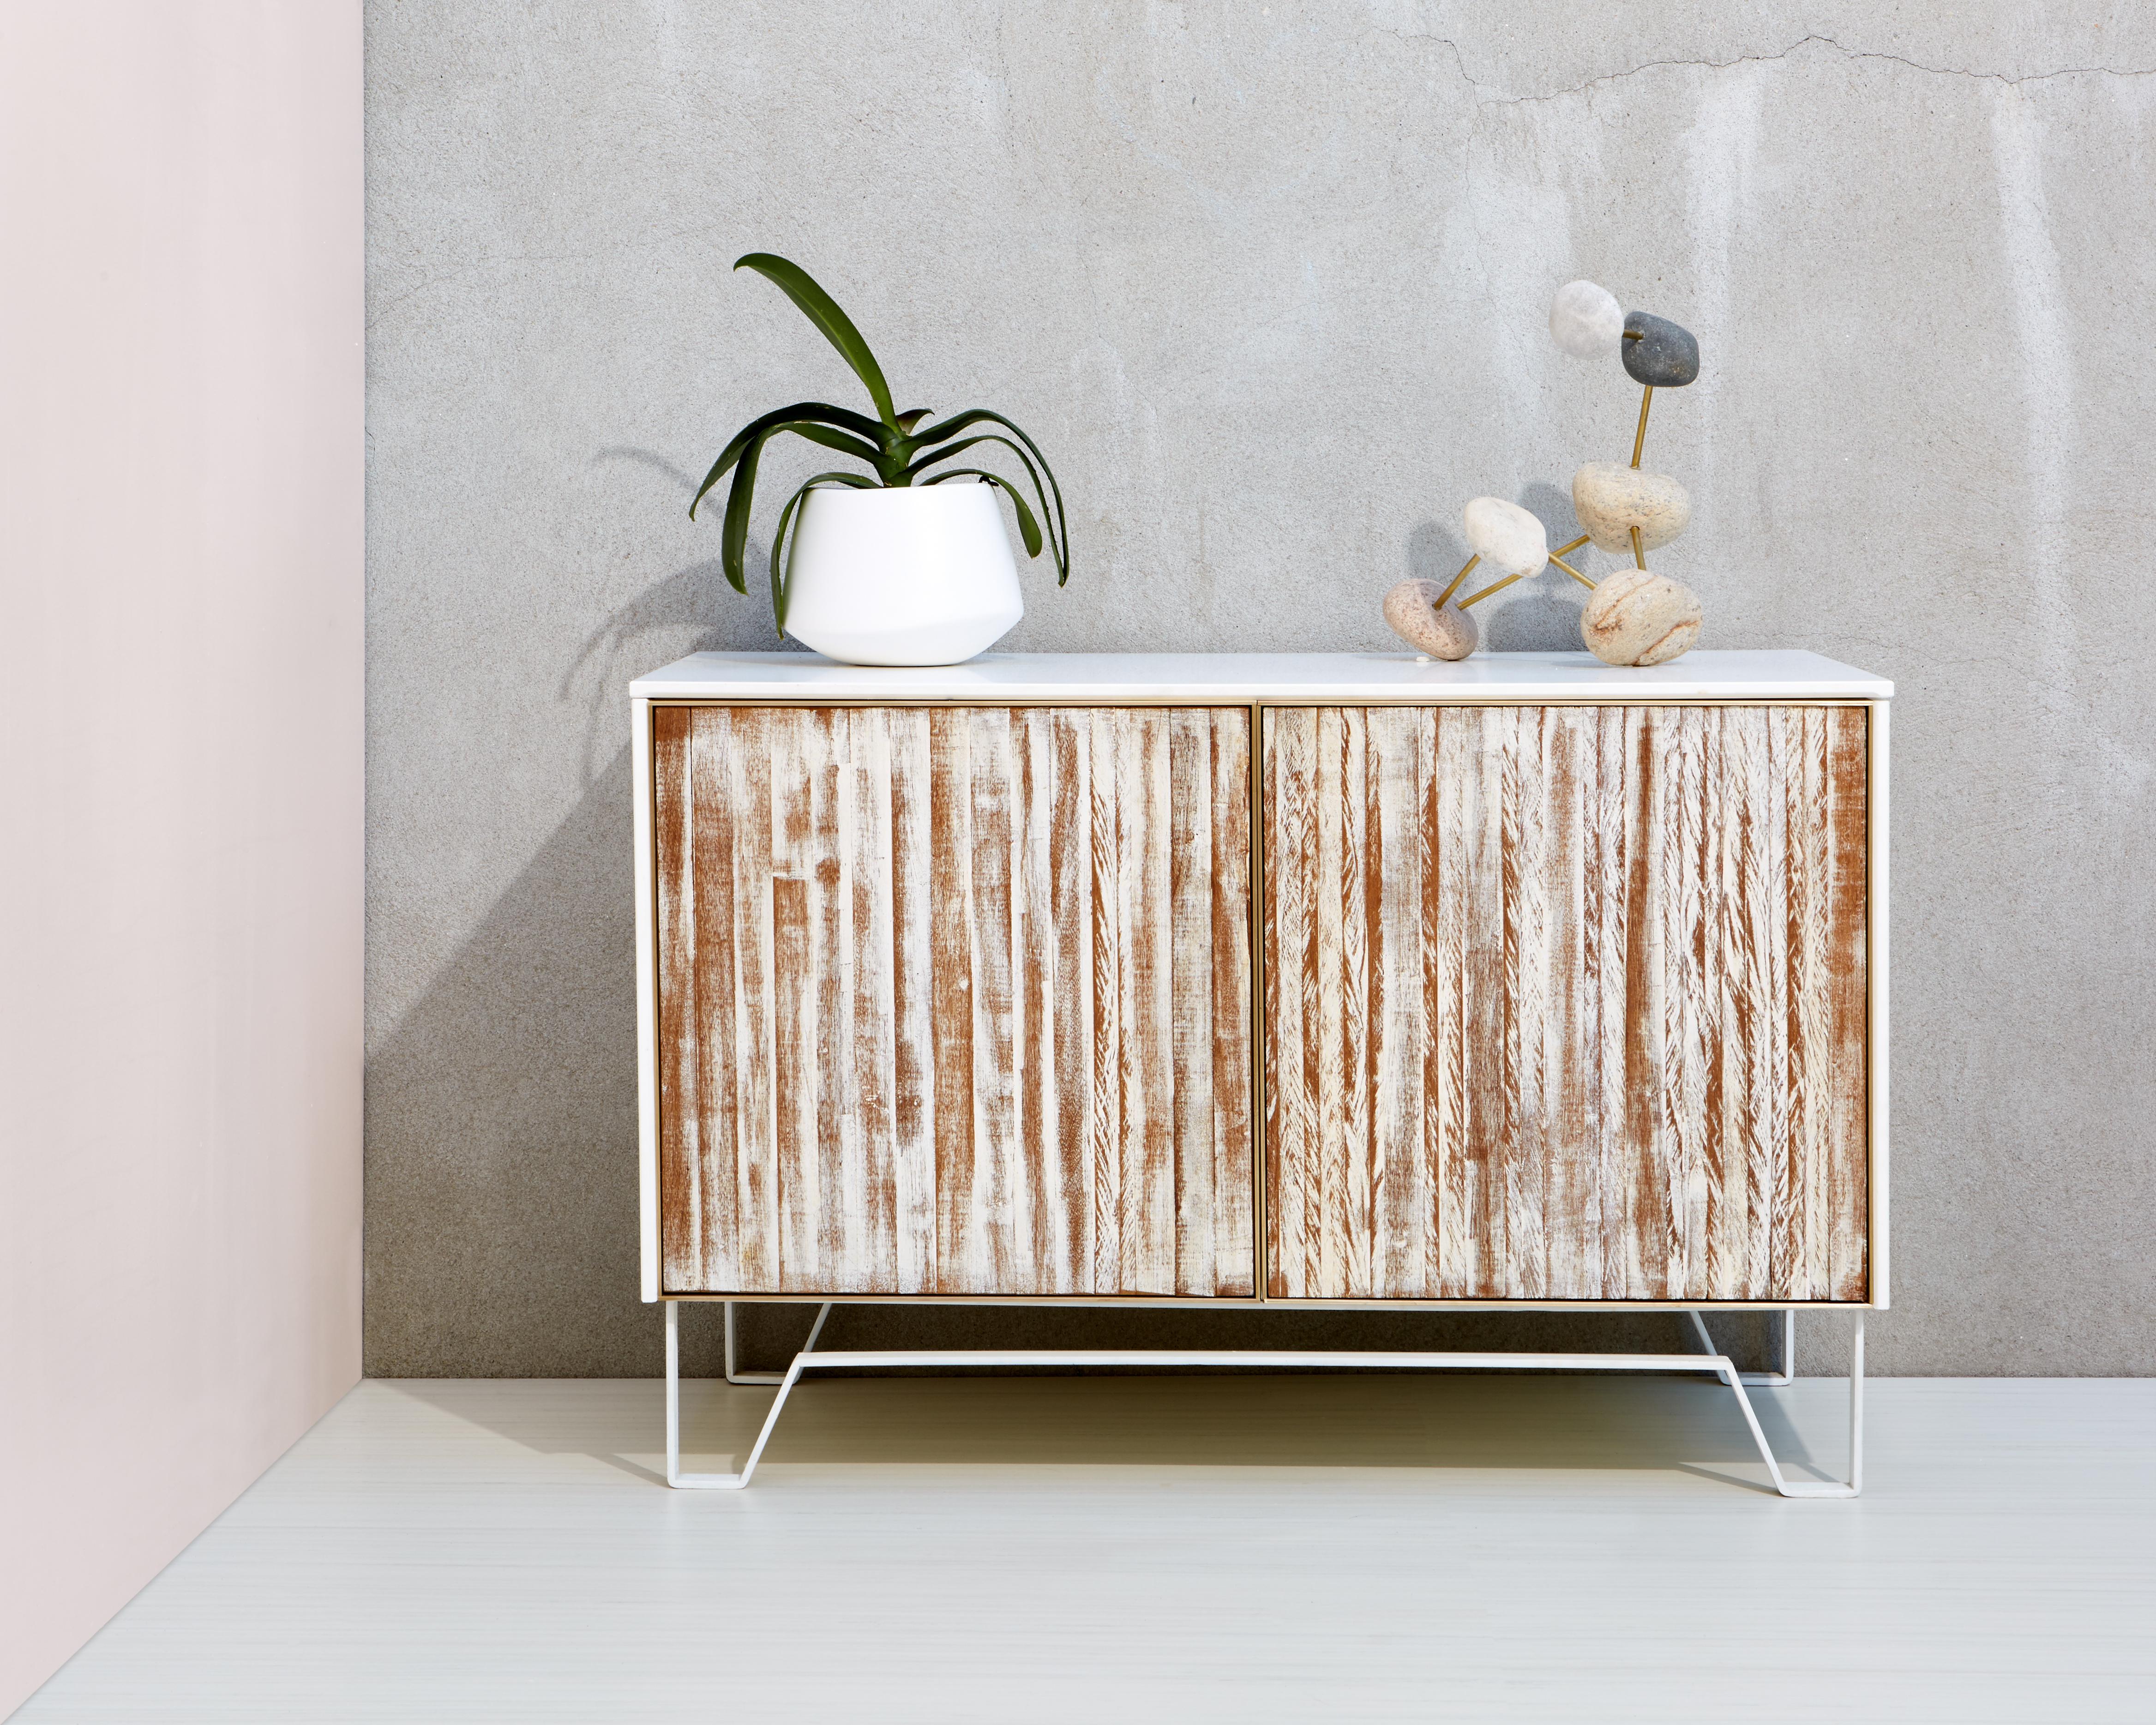 Clean lines of modern materials seamlessly mesh with aged hardwood in this one of a kind furniture piece. Floating effortlessly atop a thin profile of our handcrafted  Loop Legs, the soft matte finish of the exterior panels frames the subtle yet